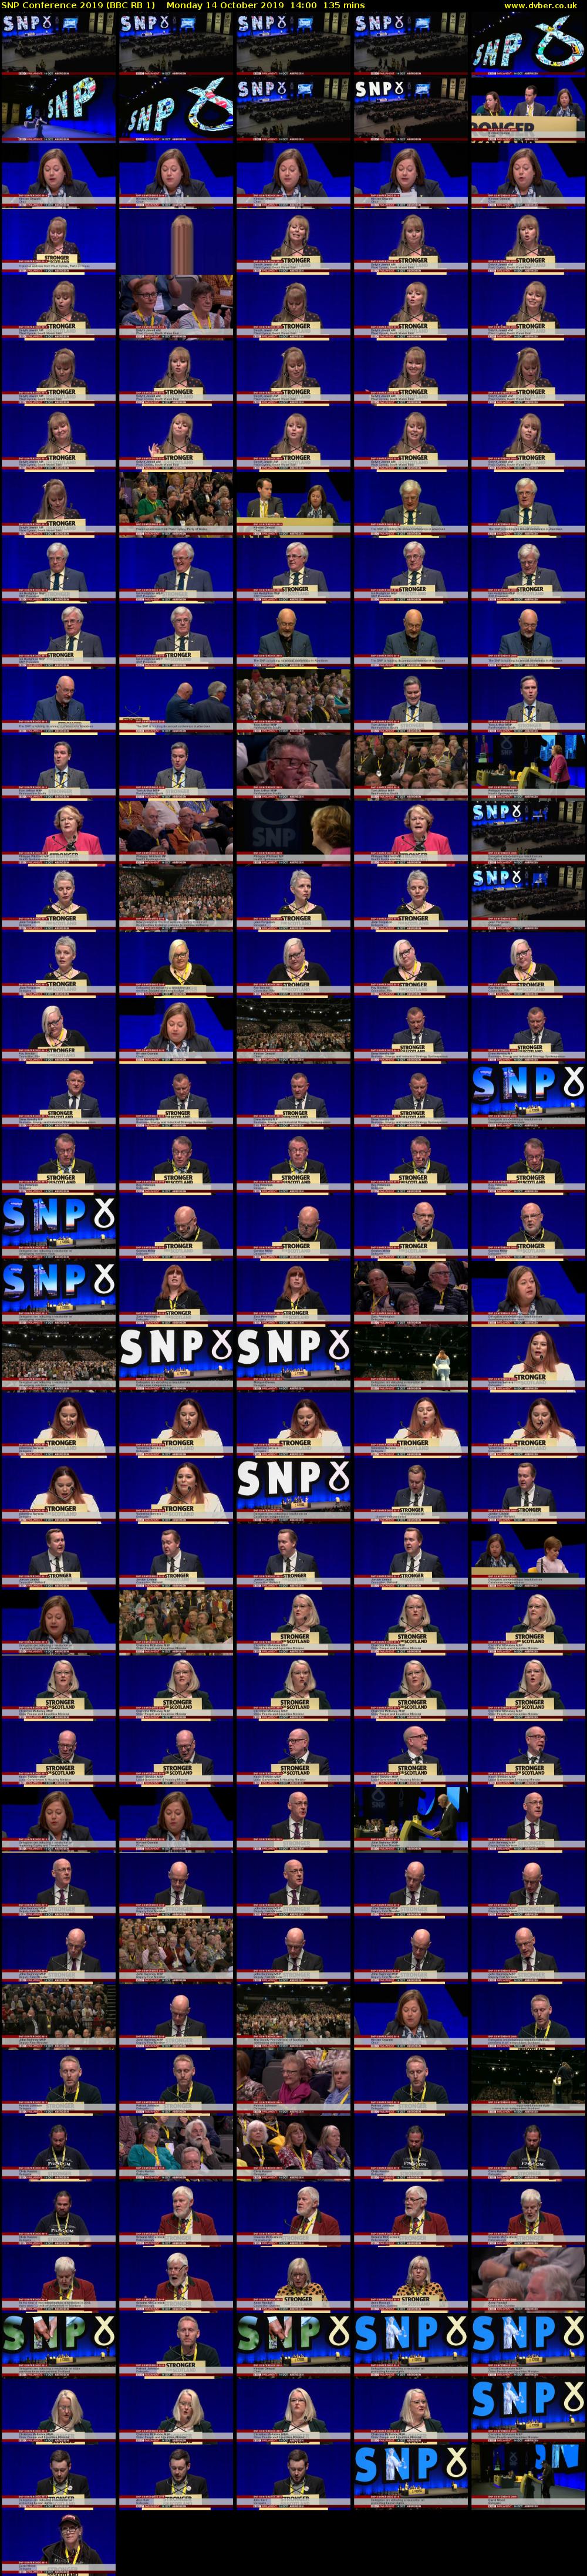 SNP Conference 2019 (BBC RB 1) Monday 14 October 2019 14:00 - 16:15